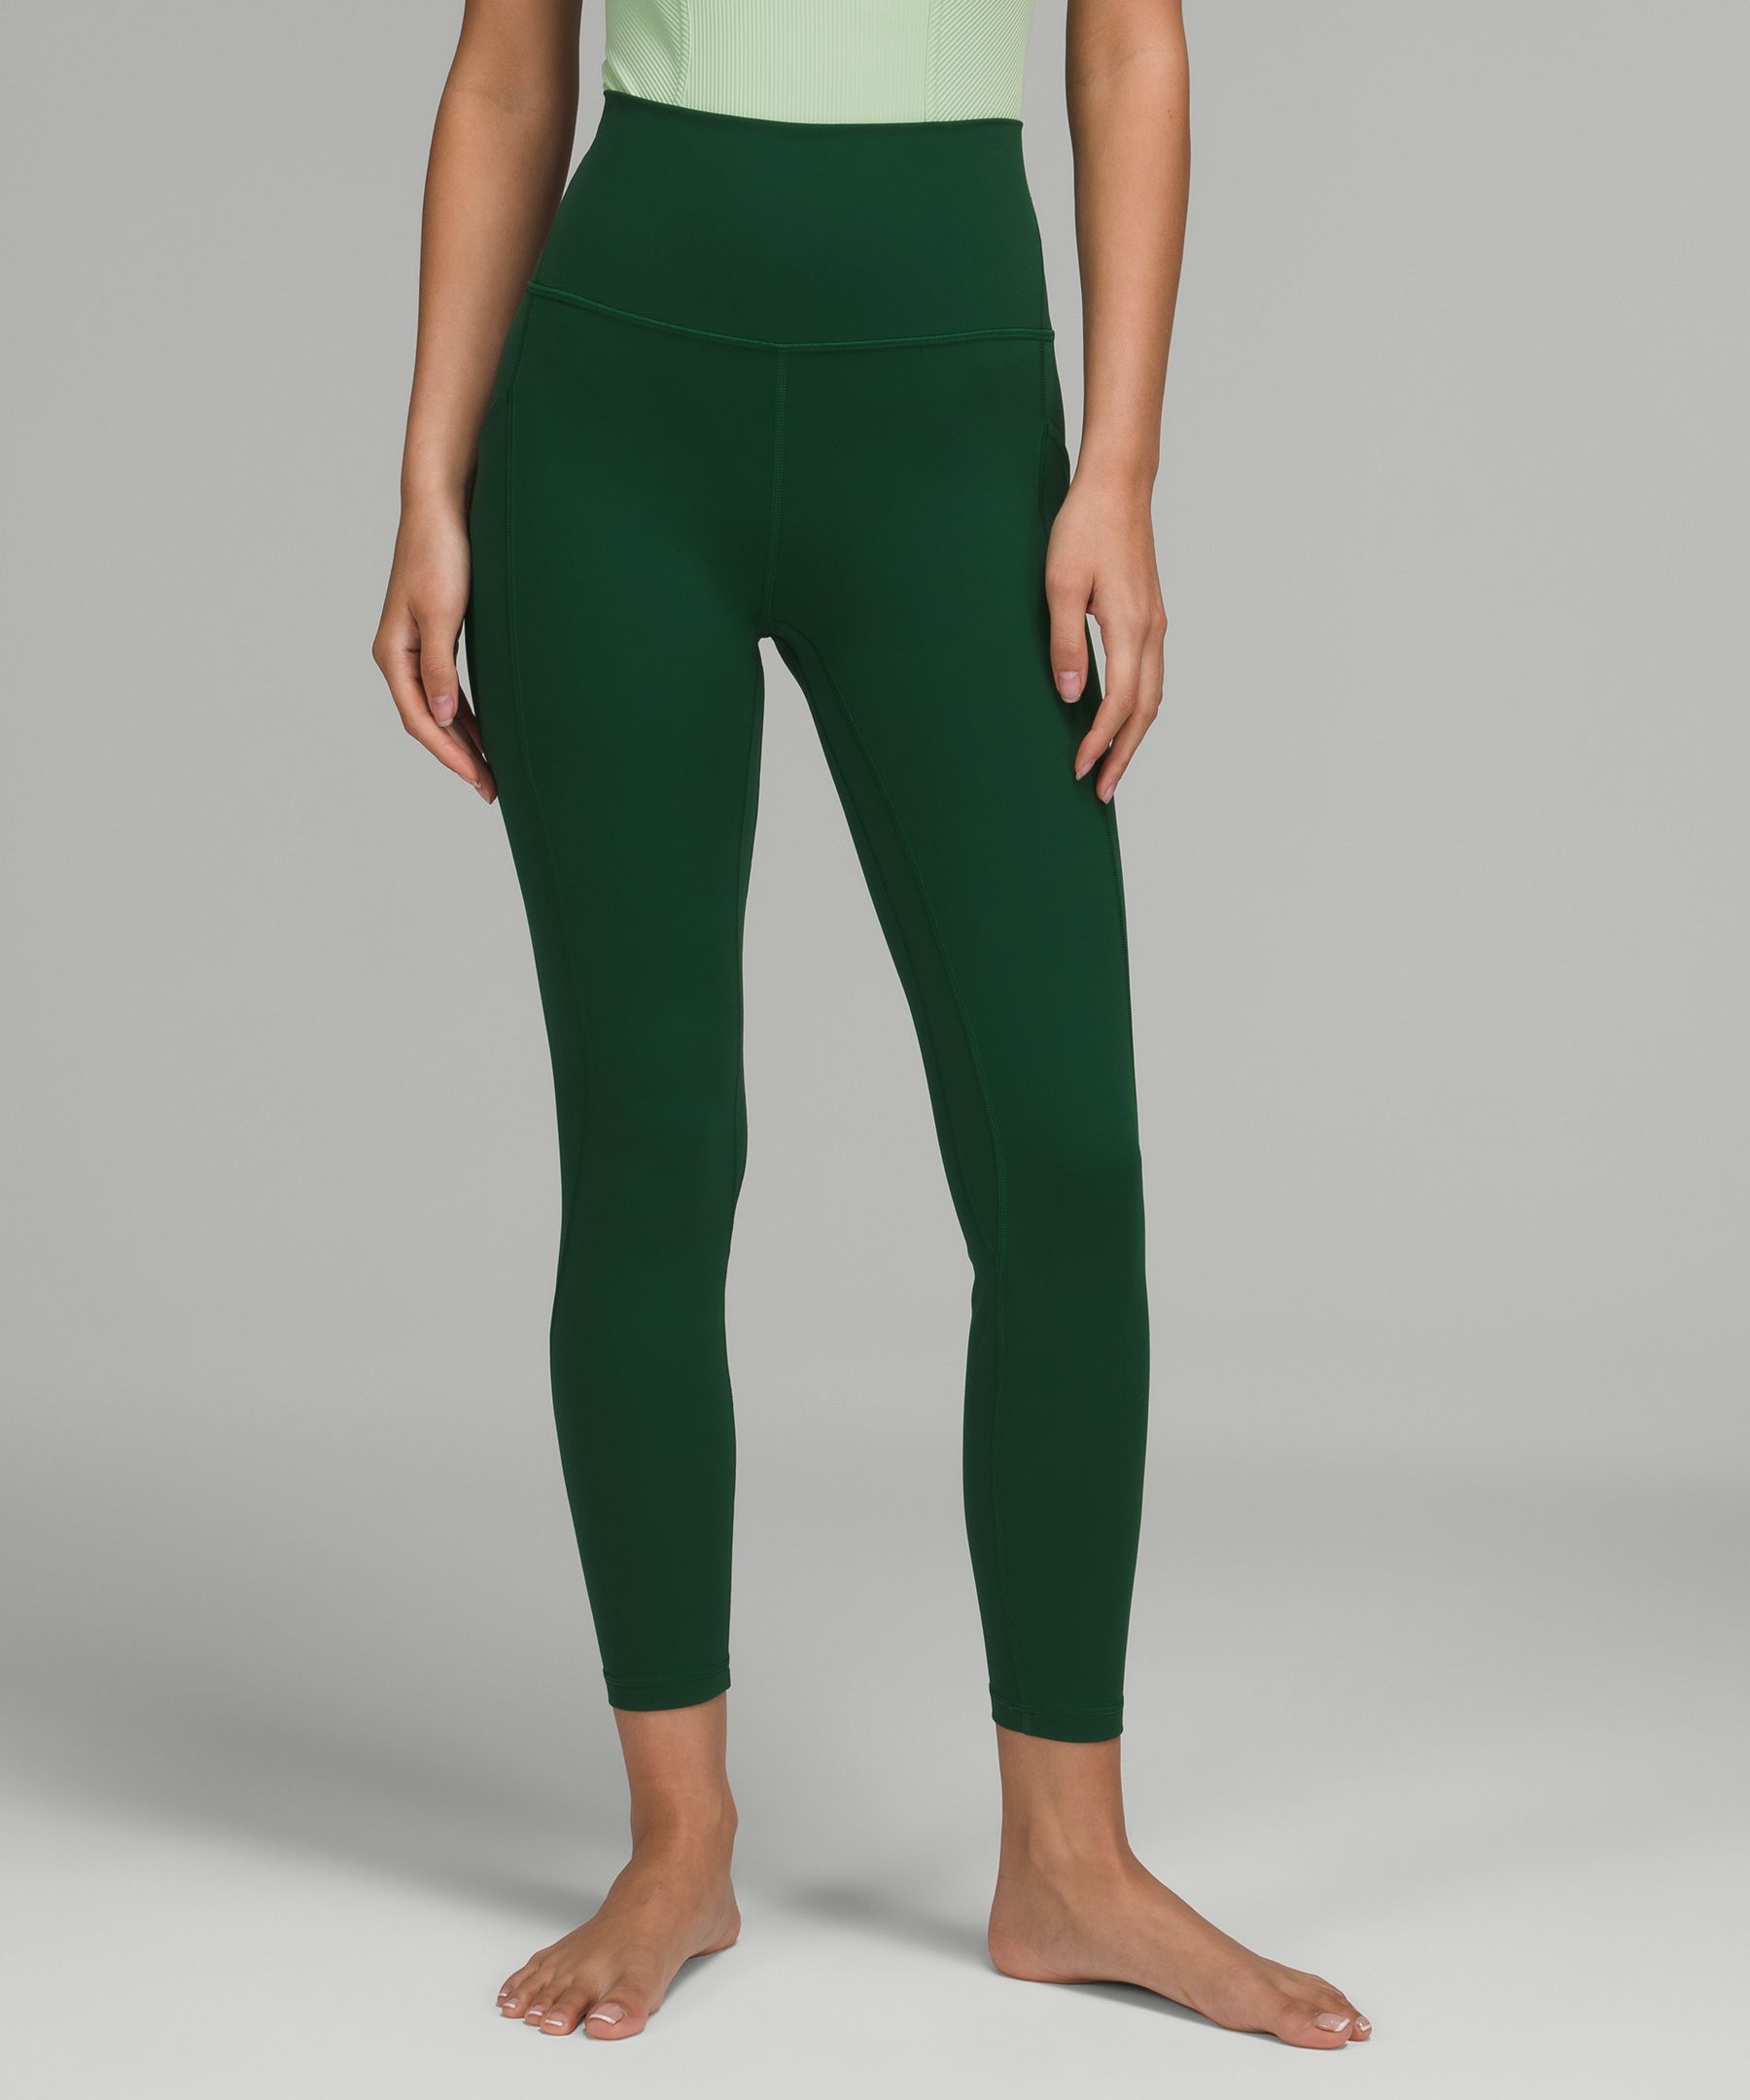 Lululemon Align™ High-rise Pants With Pockets 25"